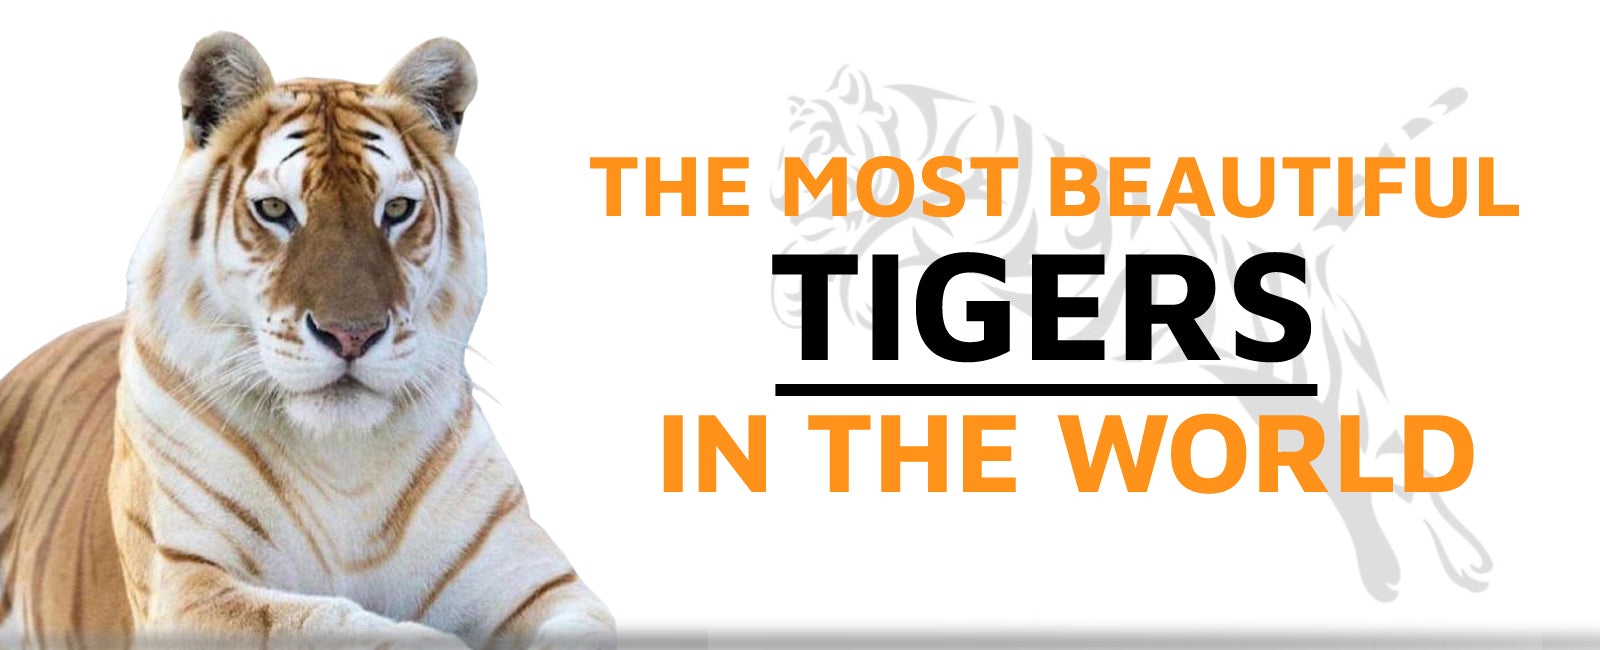 The Most Beautiful Tigers in the World